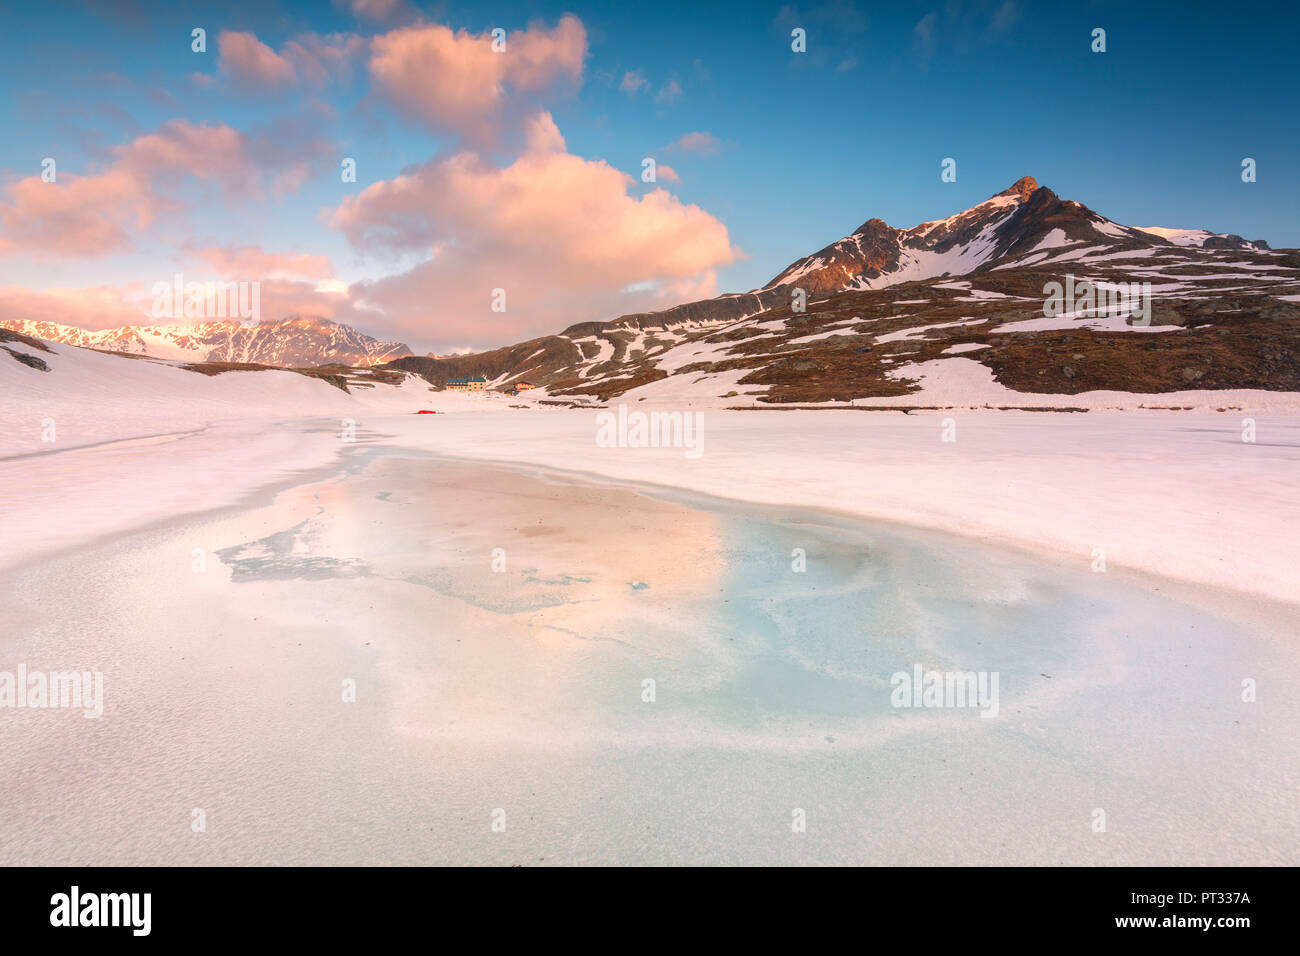 Thaw at Gavia pass, Lombardy district, Brescia province, Italy, Stock Photo